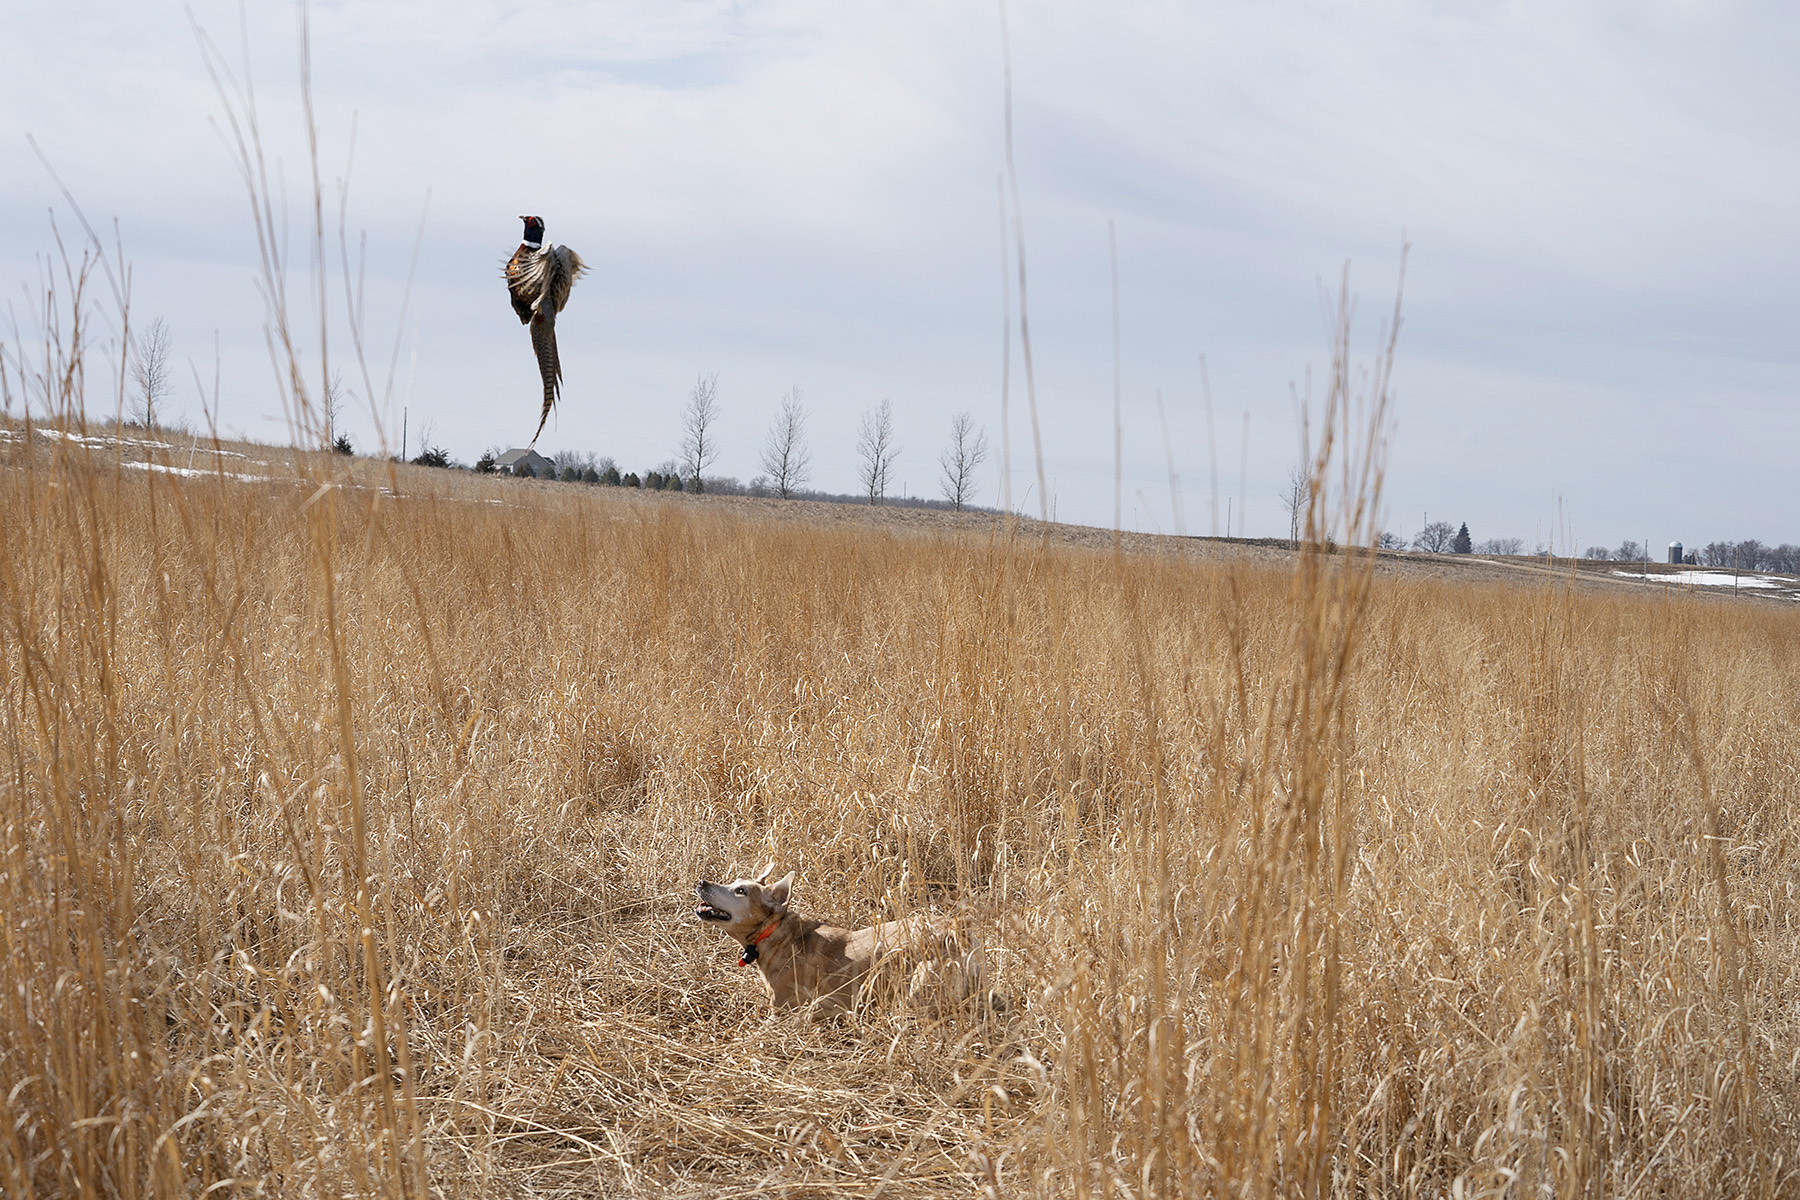 Albert flushed a pheasant on his last hunt March 10 at Caribou Gun Club in Le Sueur.